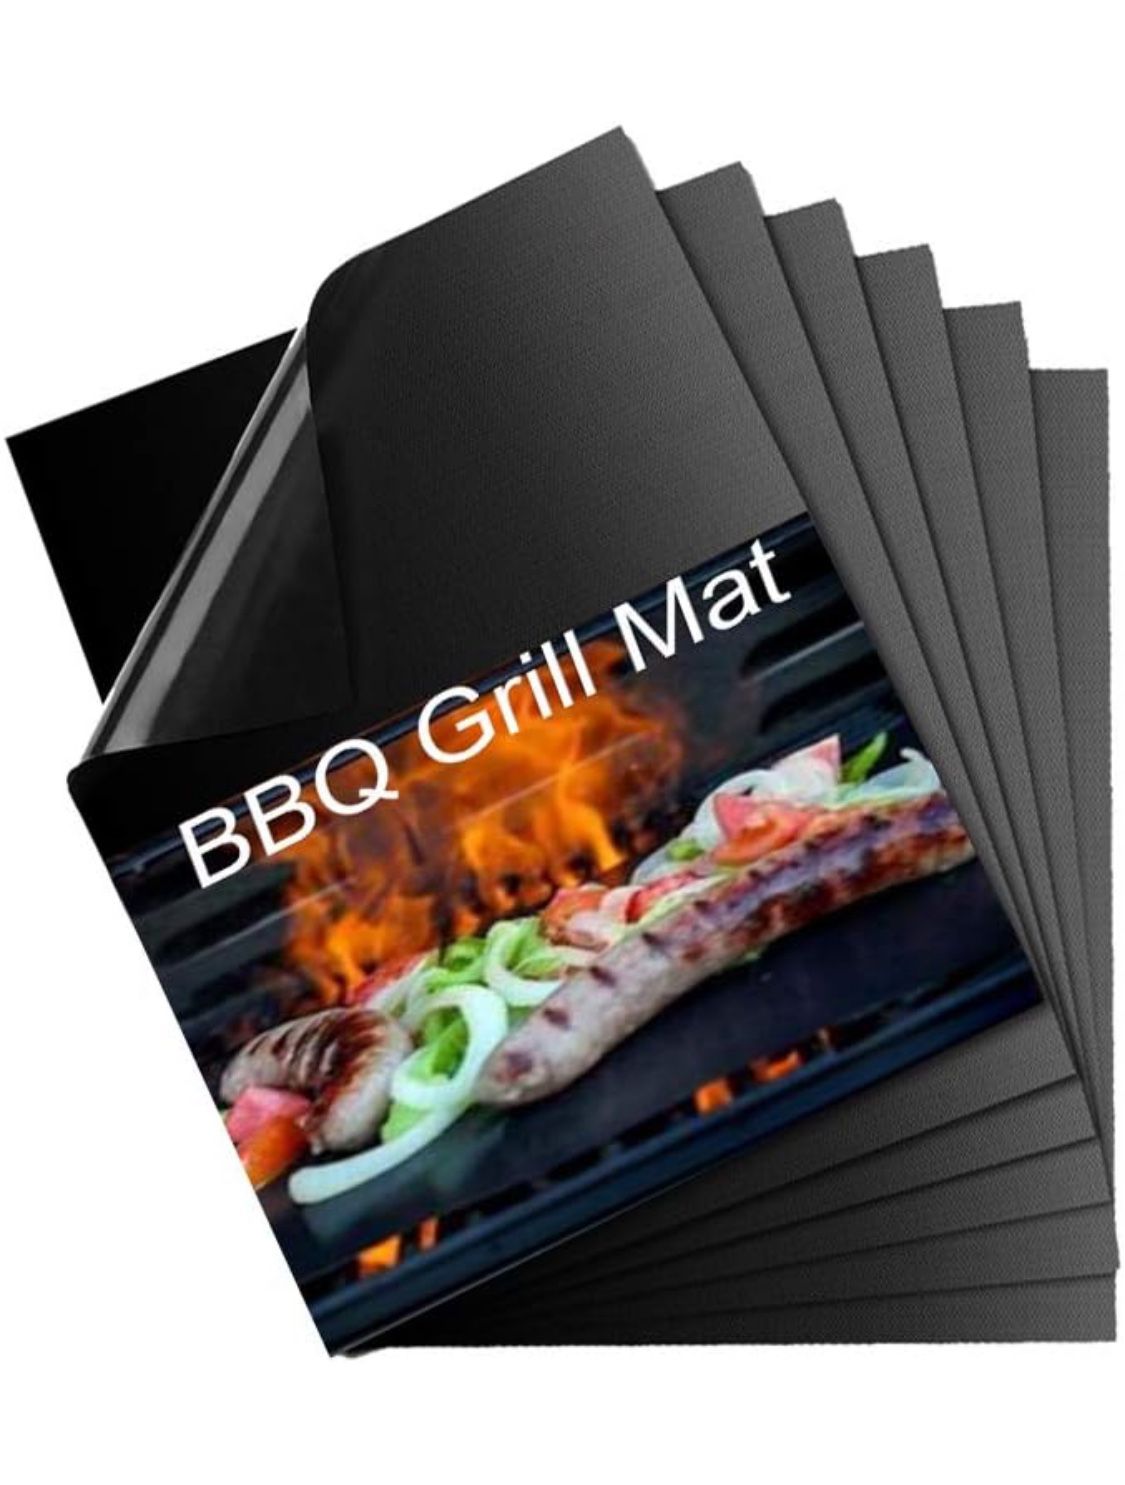 Grill Mat, Set of 6 BBQ Grill Mat Nonstick Reusable Barbecue Baking Mat Teflon Cooking Mats for Electric Grill Gas Charcoal BBQ, Easy to Clean Barbecu